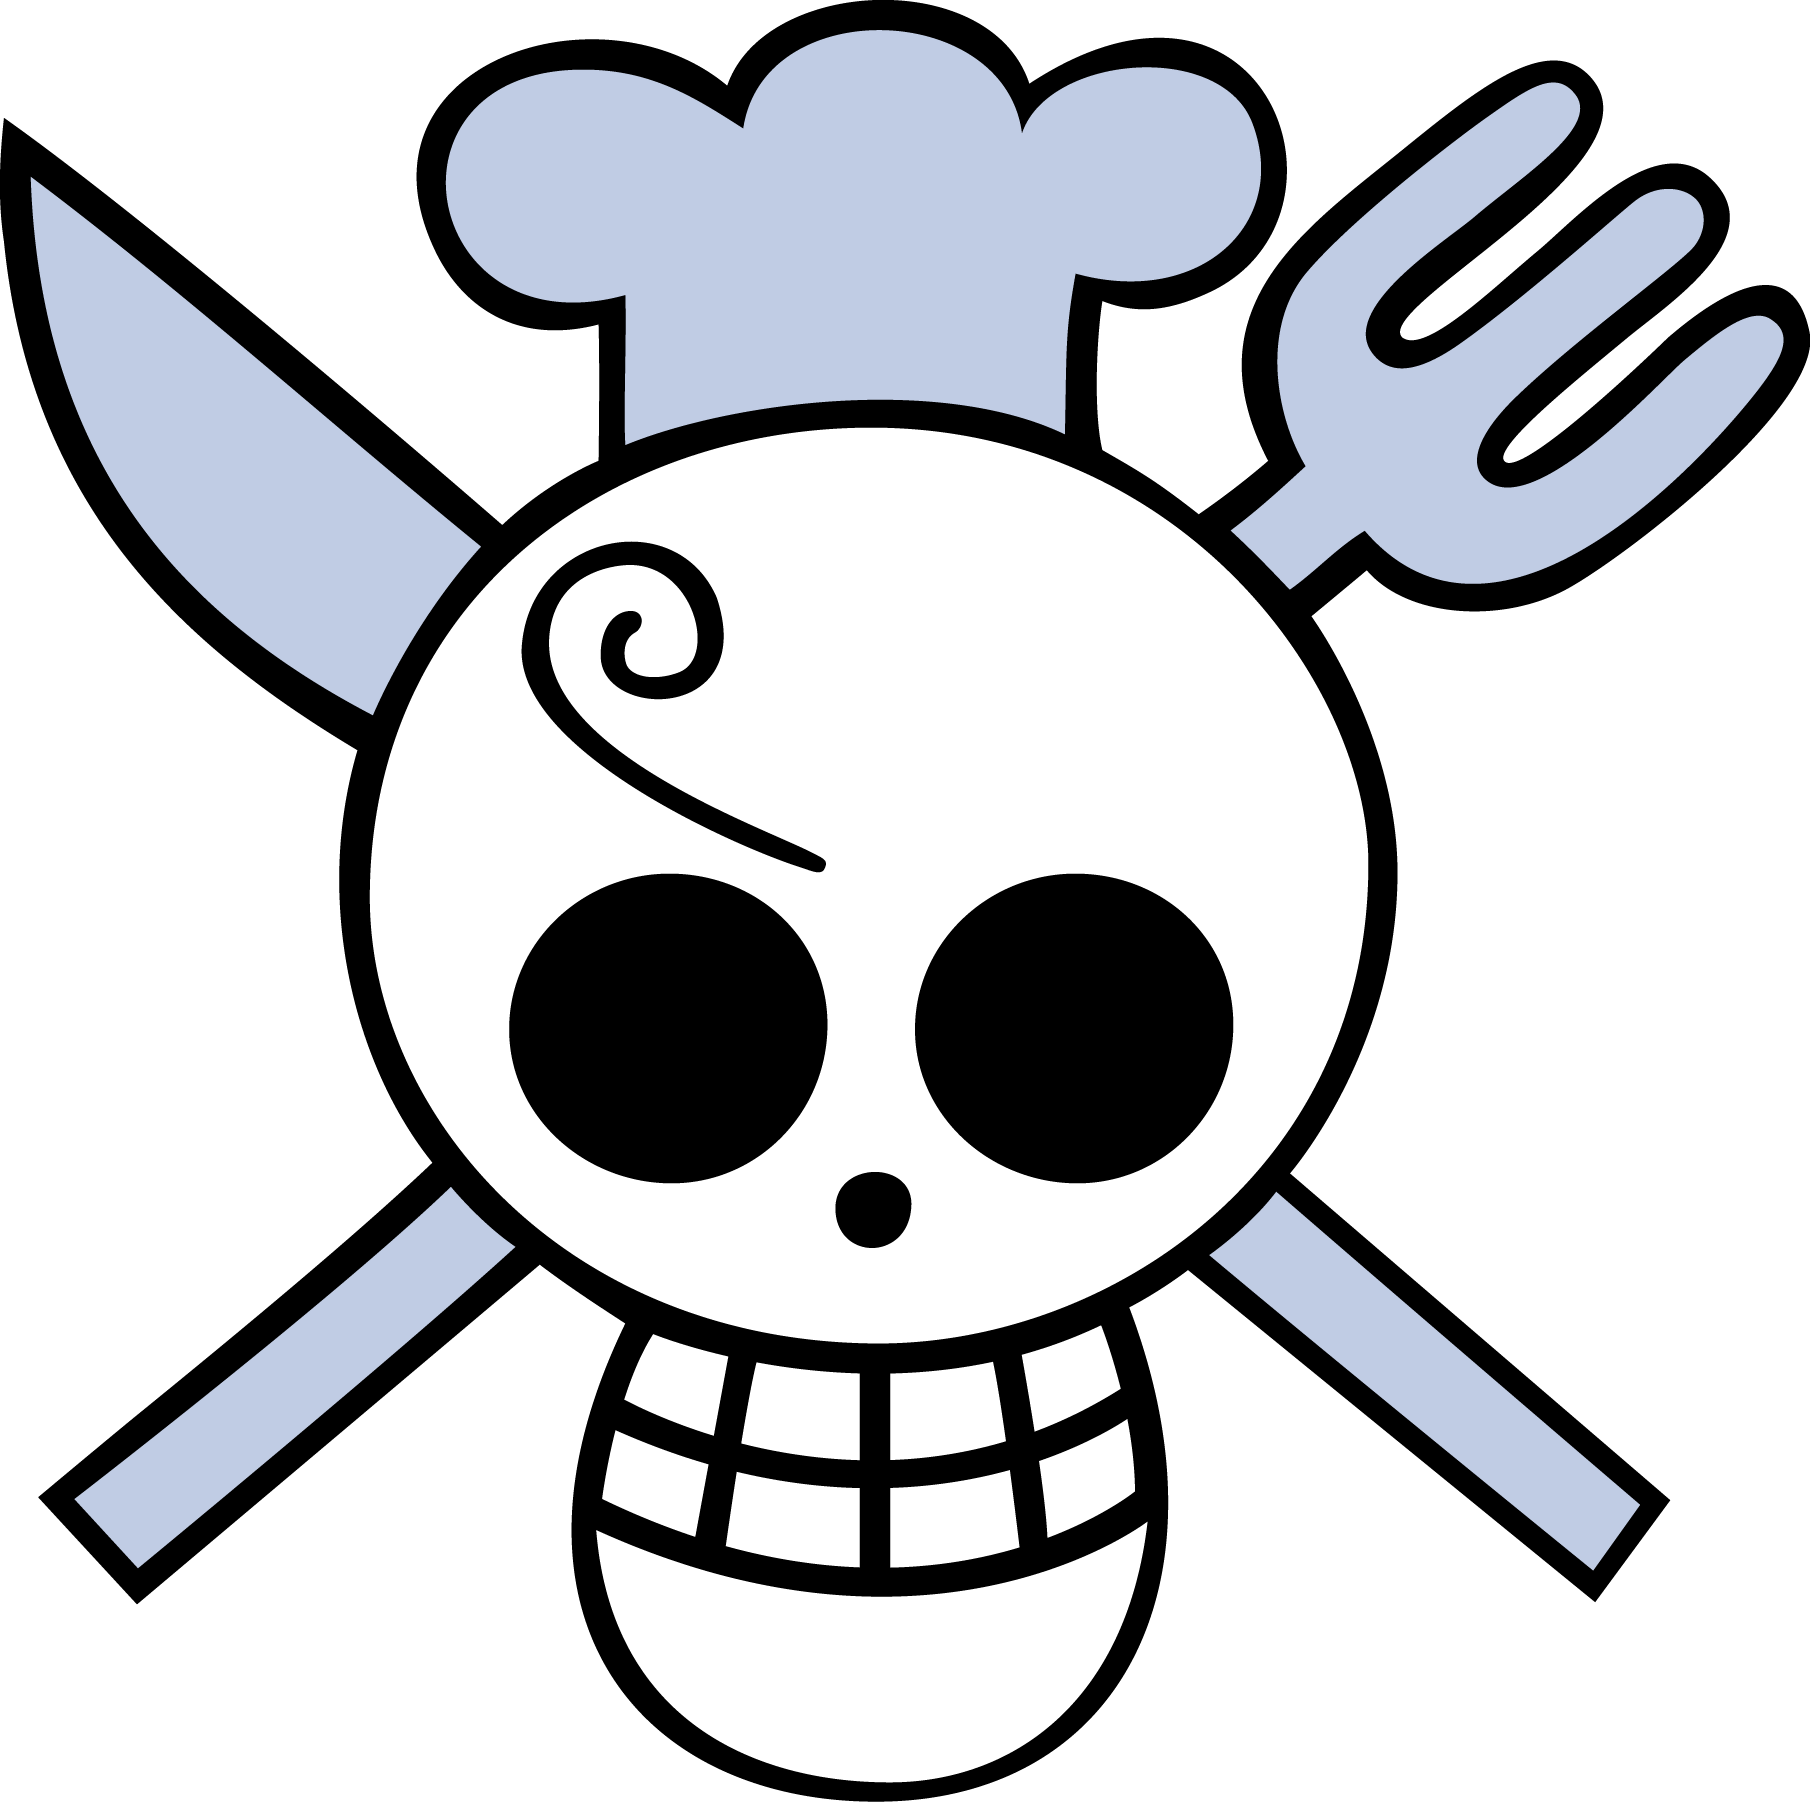 One Piece Characters by Pirate Flag Quiz - By Cyndyr